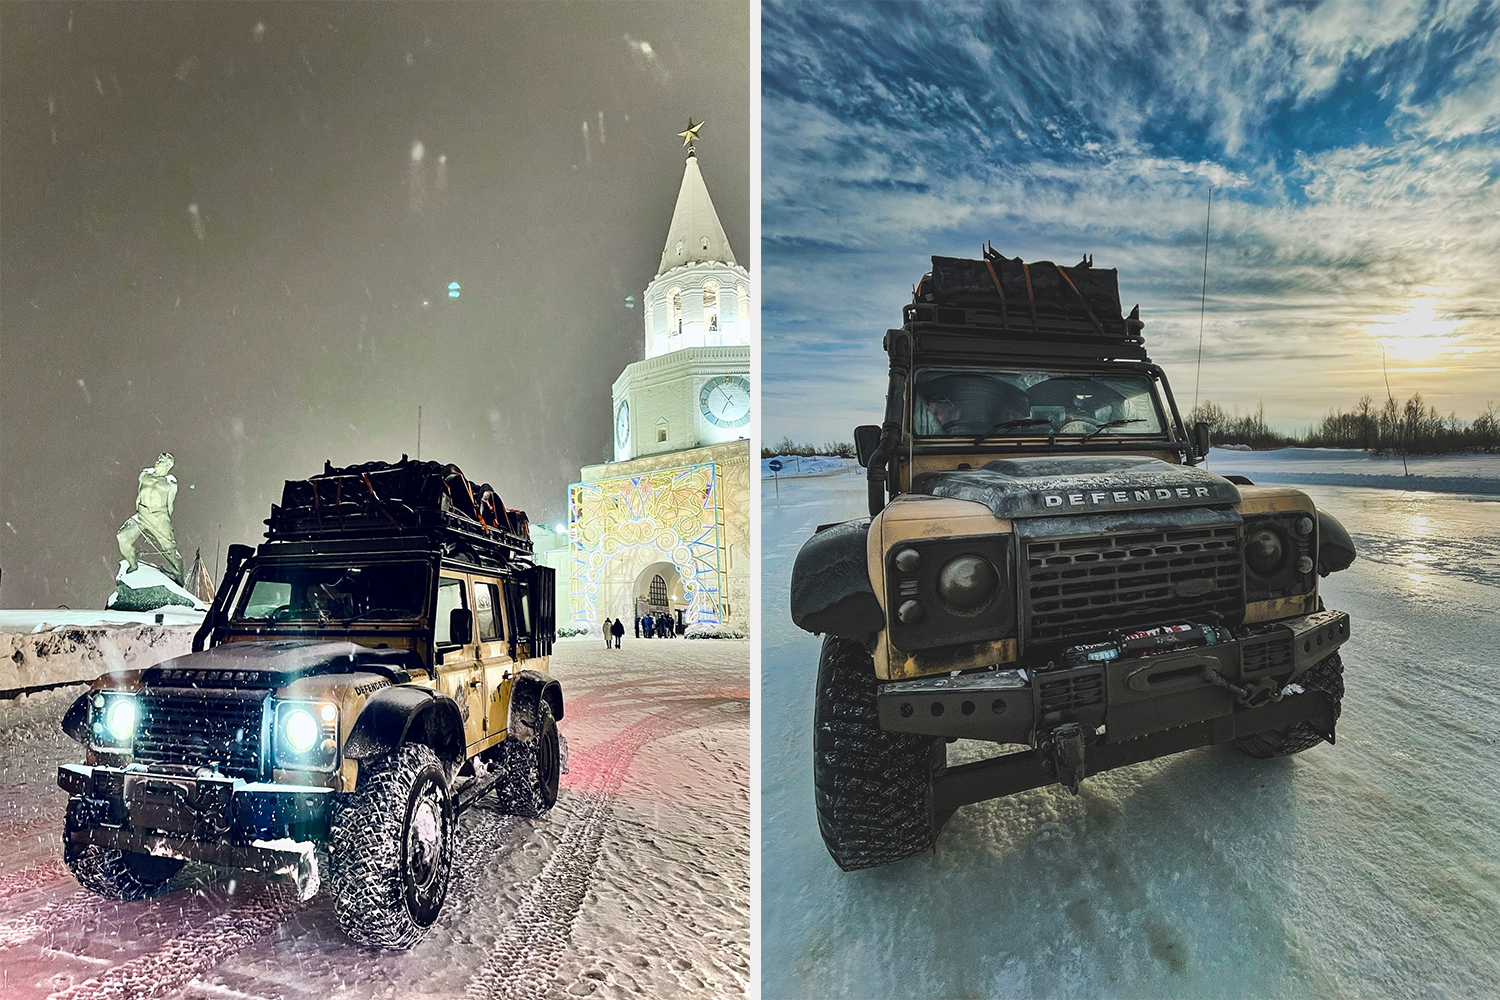 Two of the yellow and black Land Rover Defender SUVs from the DefenderX London to New York expedition driving through Russia, including the Kazan Kremlin in the left photo